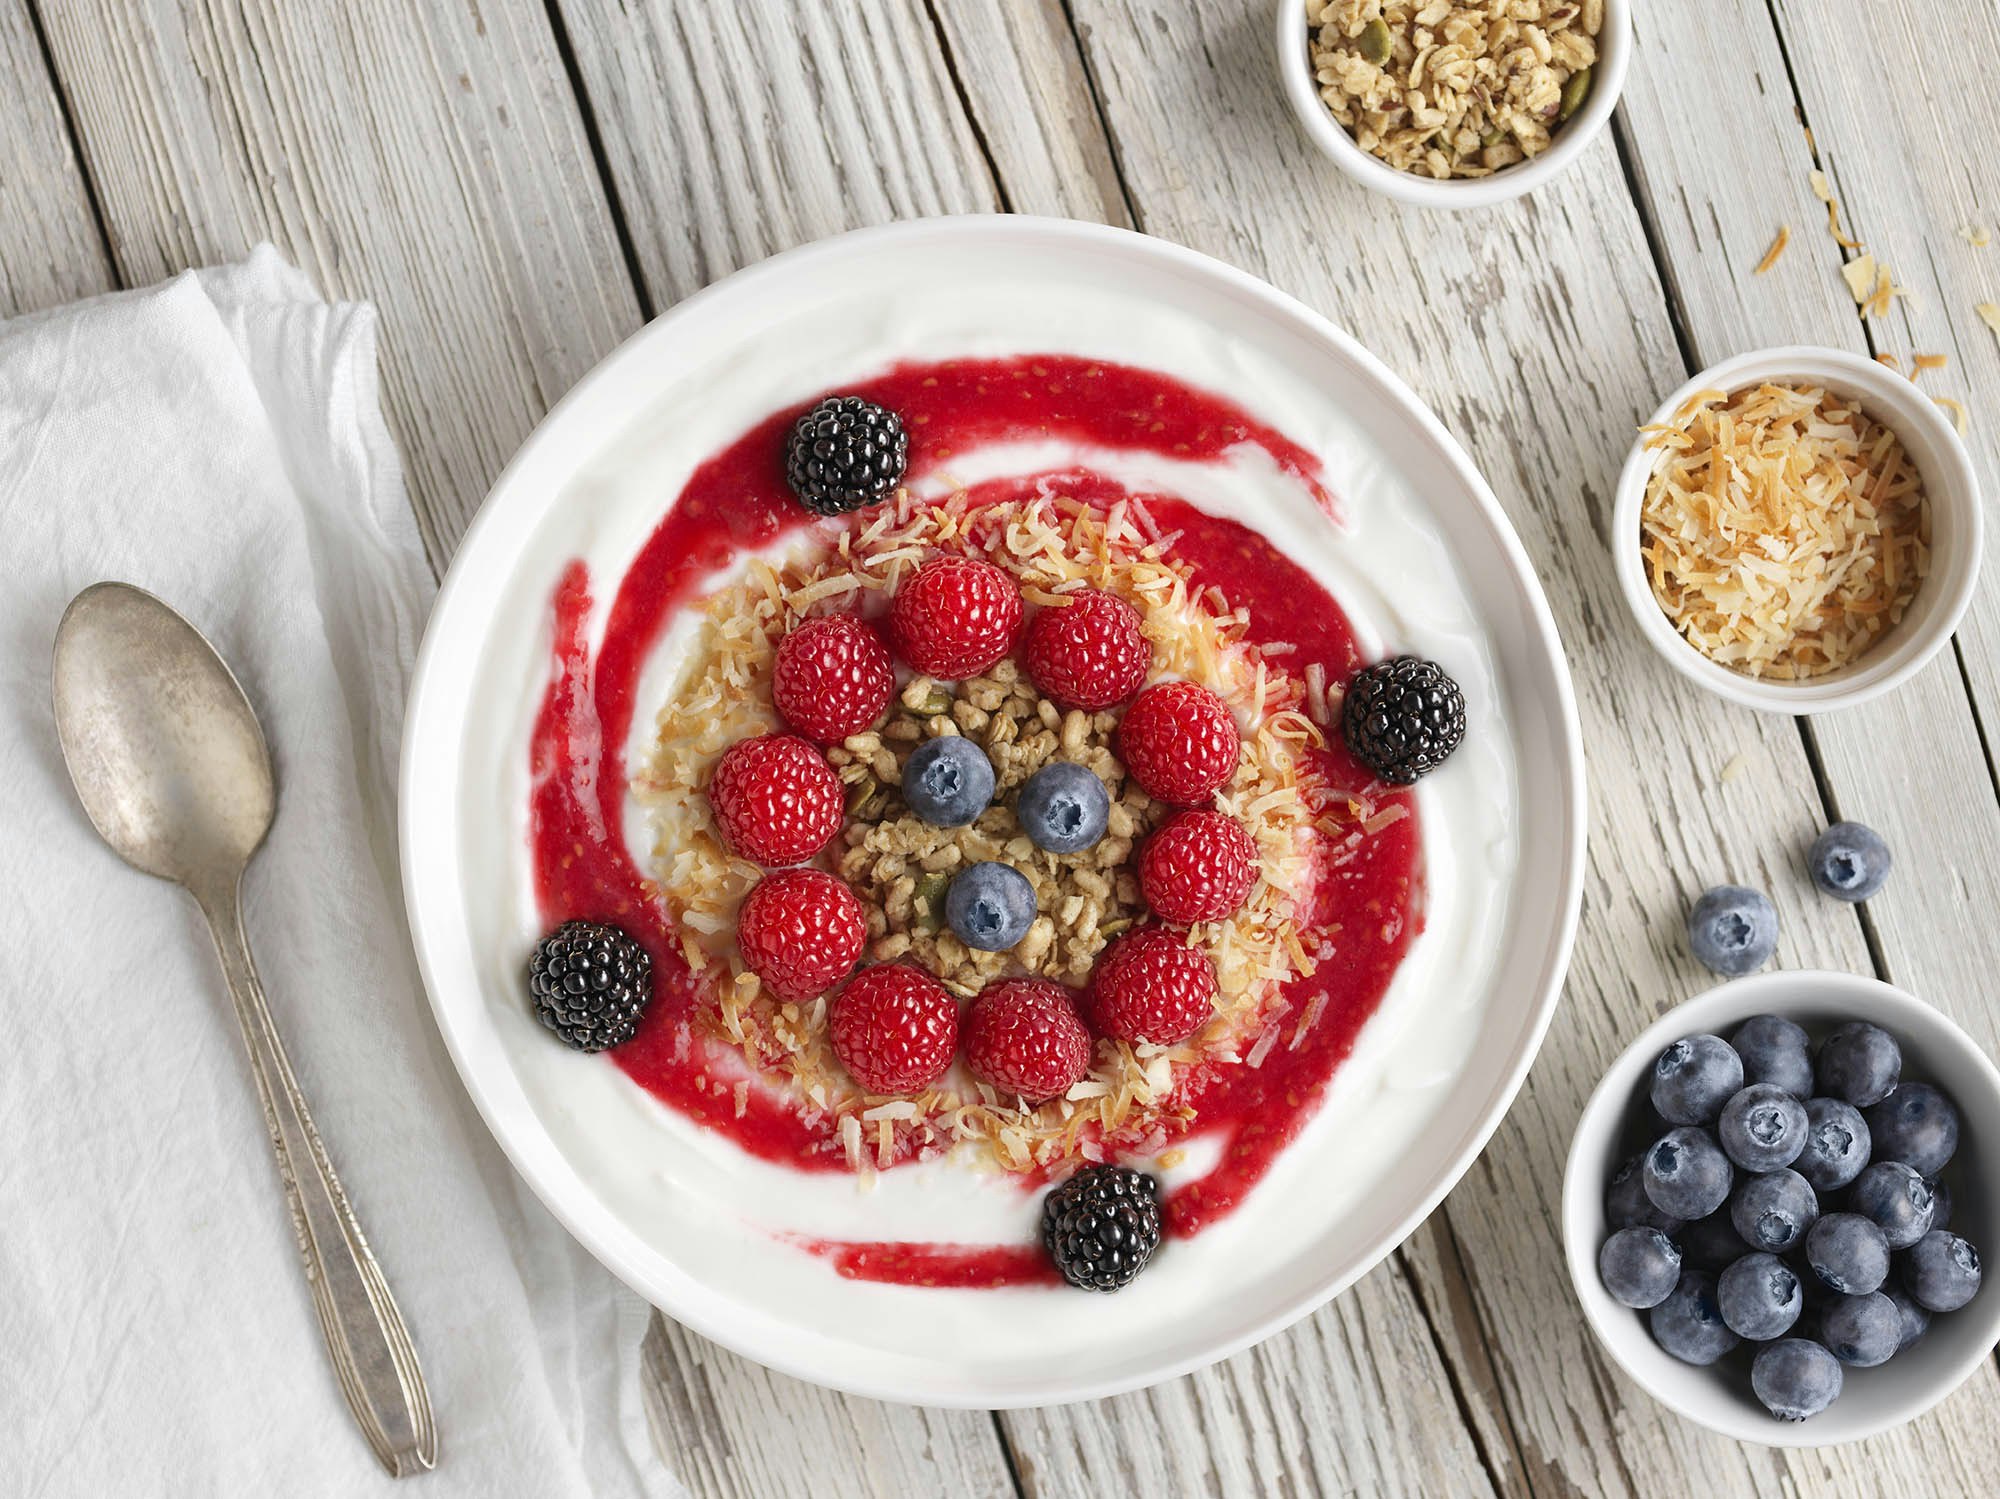 Raspberry smoothie bowl with decorative design and a bowl of blueberries